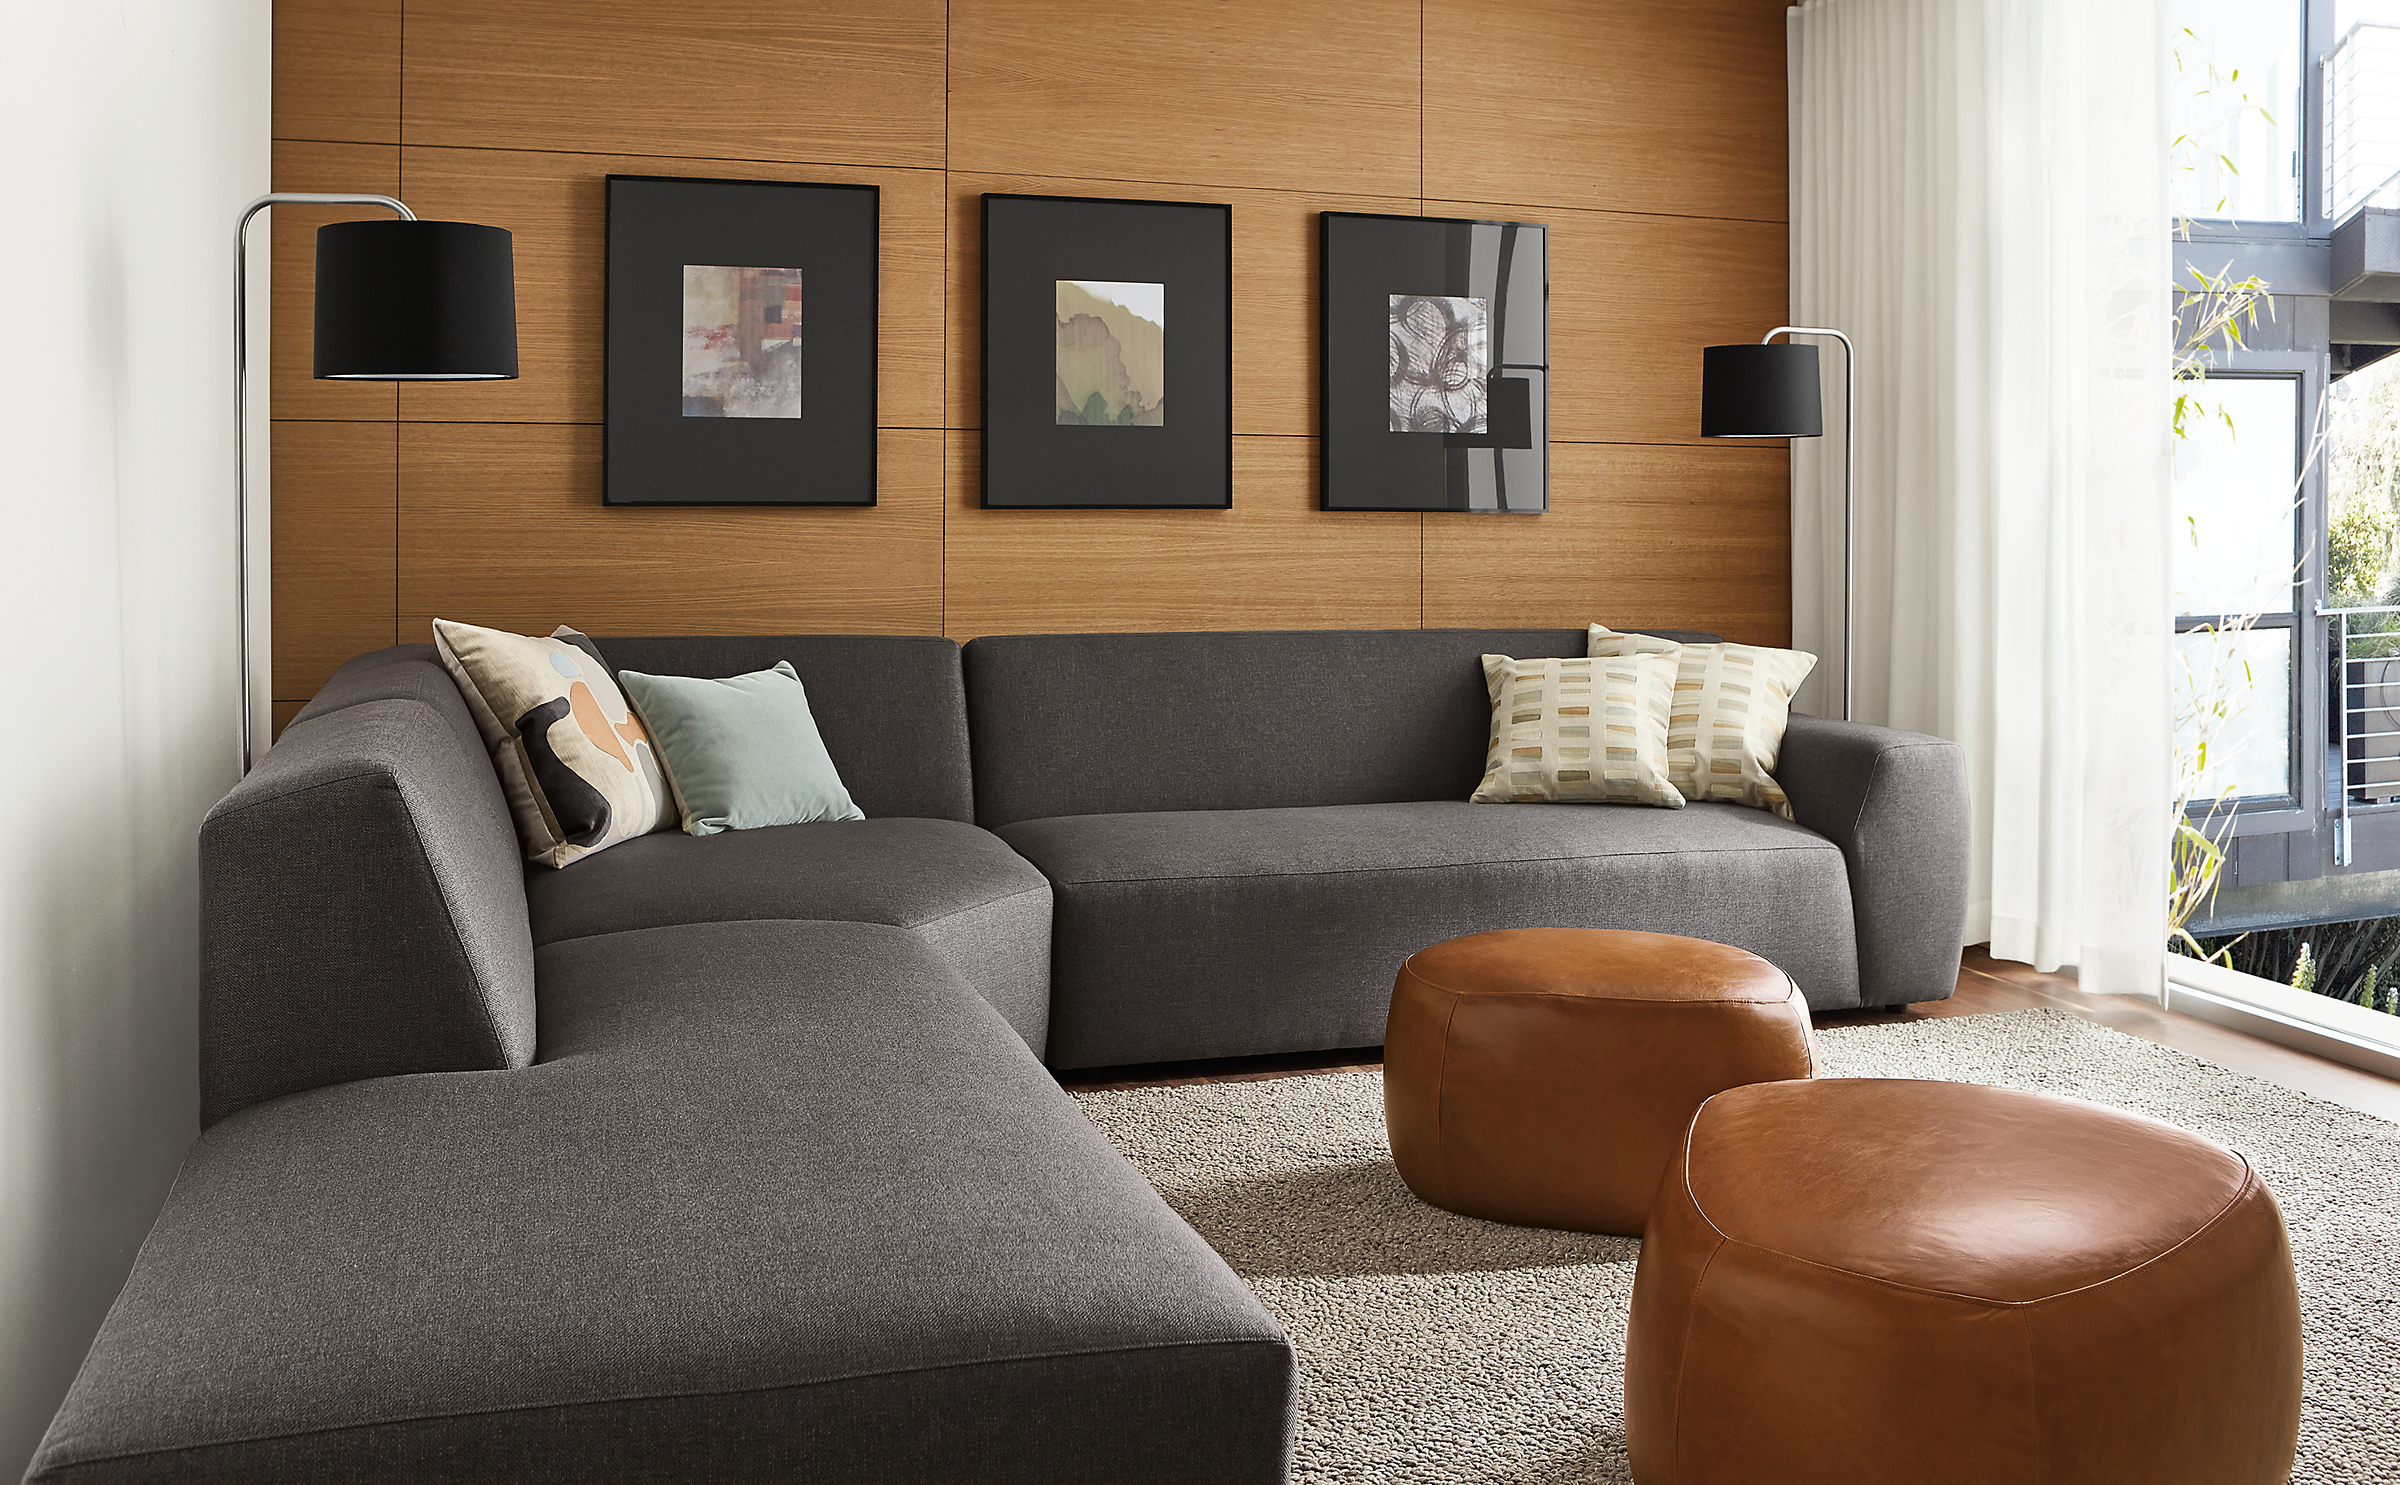 Living area with Linville three-piece sectional in Gino charcoal fabric and two Asher ottomans in Vento cognac leather.